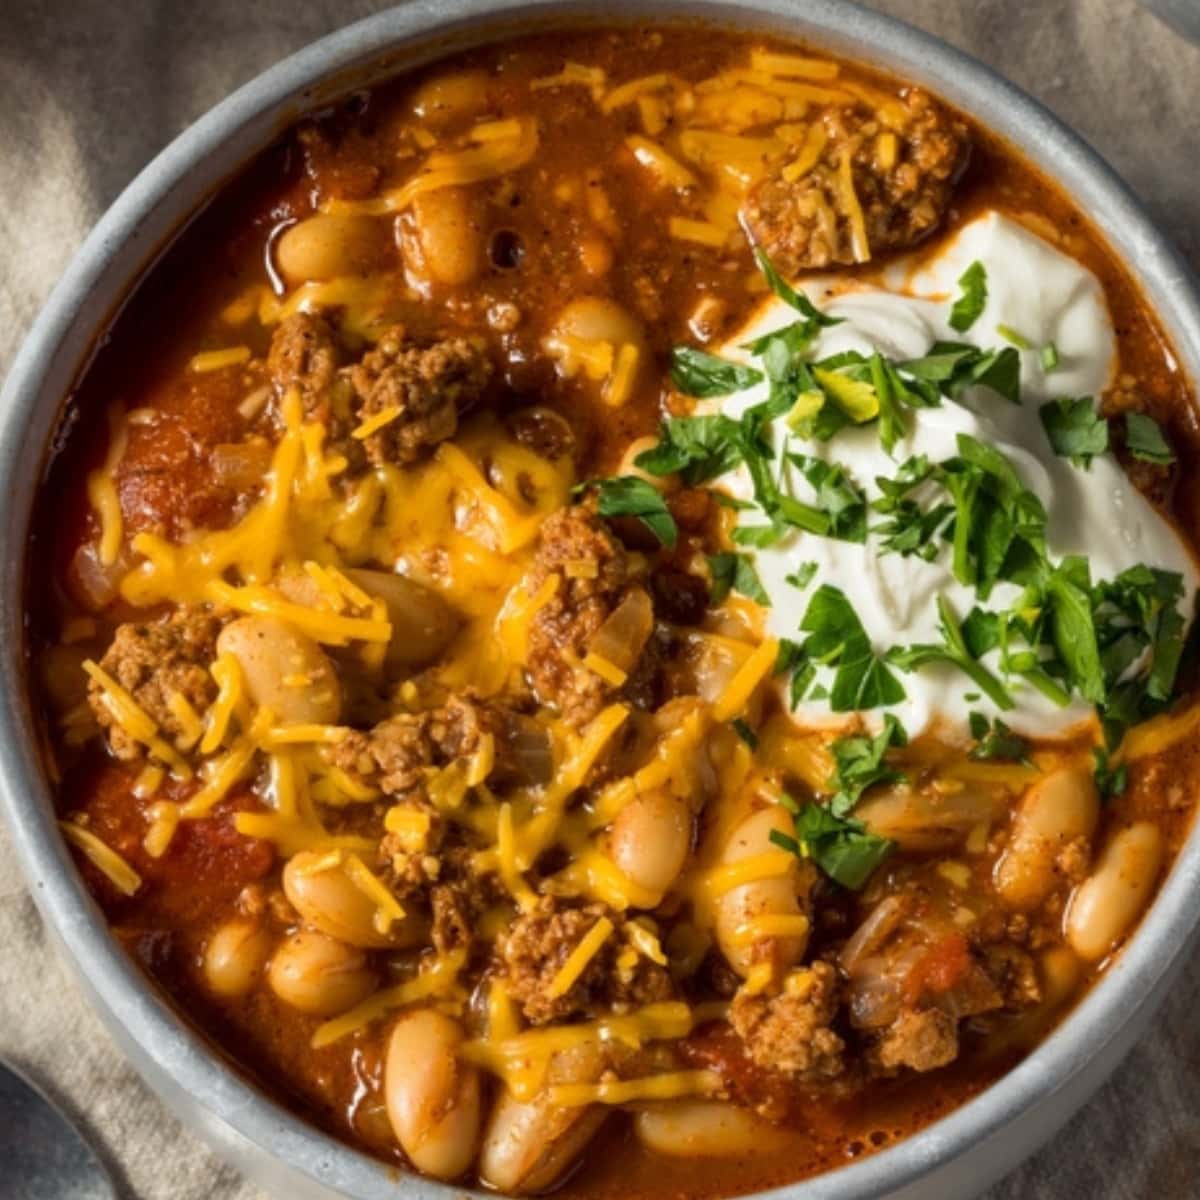 Savory Turkey Chili With Cheese, Sour Cream and Chopped Fresh Parsley